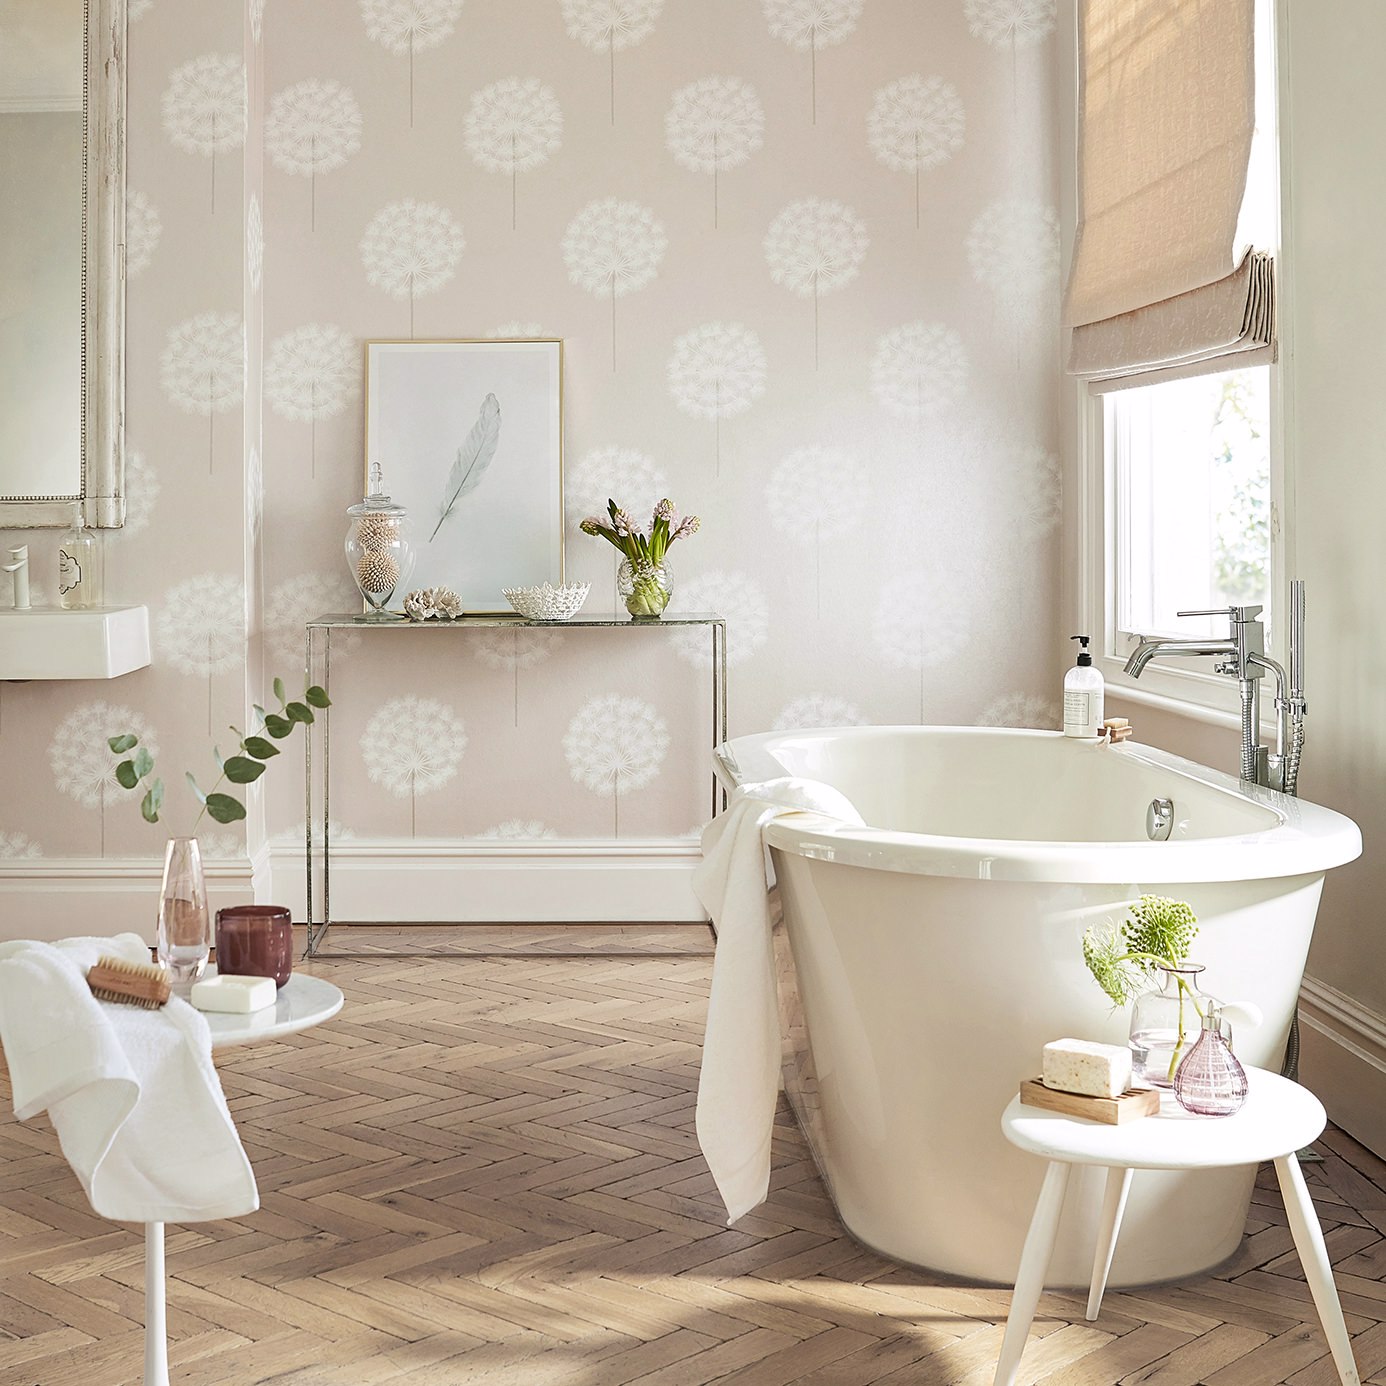 Can you use wallpaper in bathrooms?